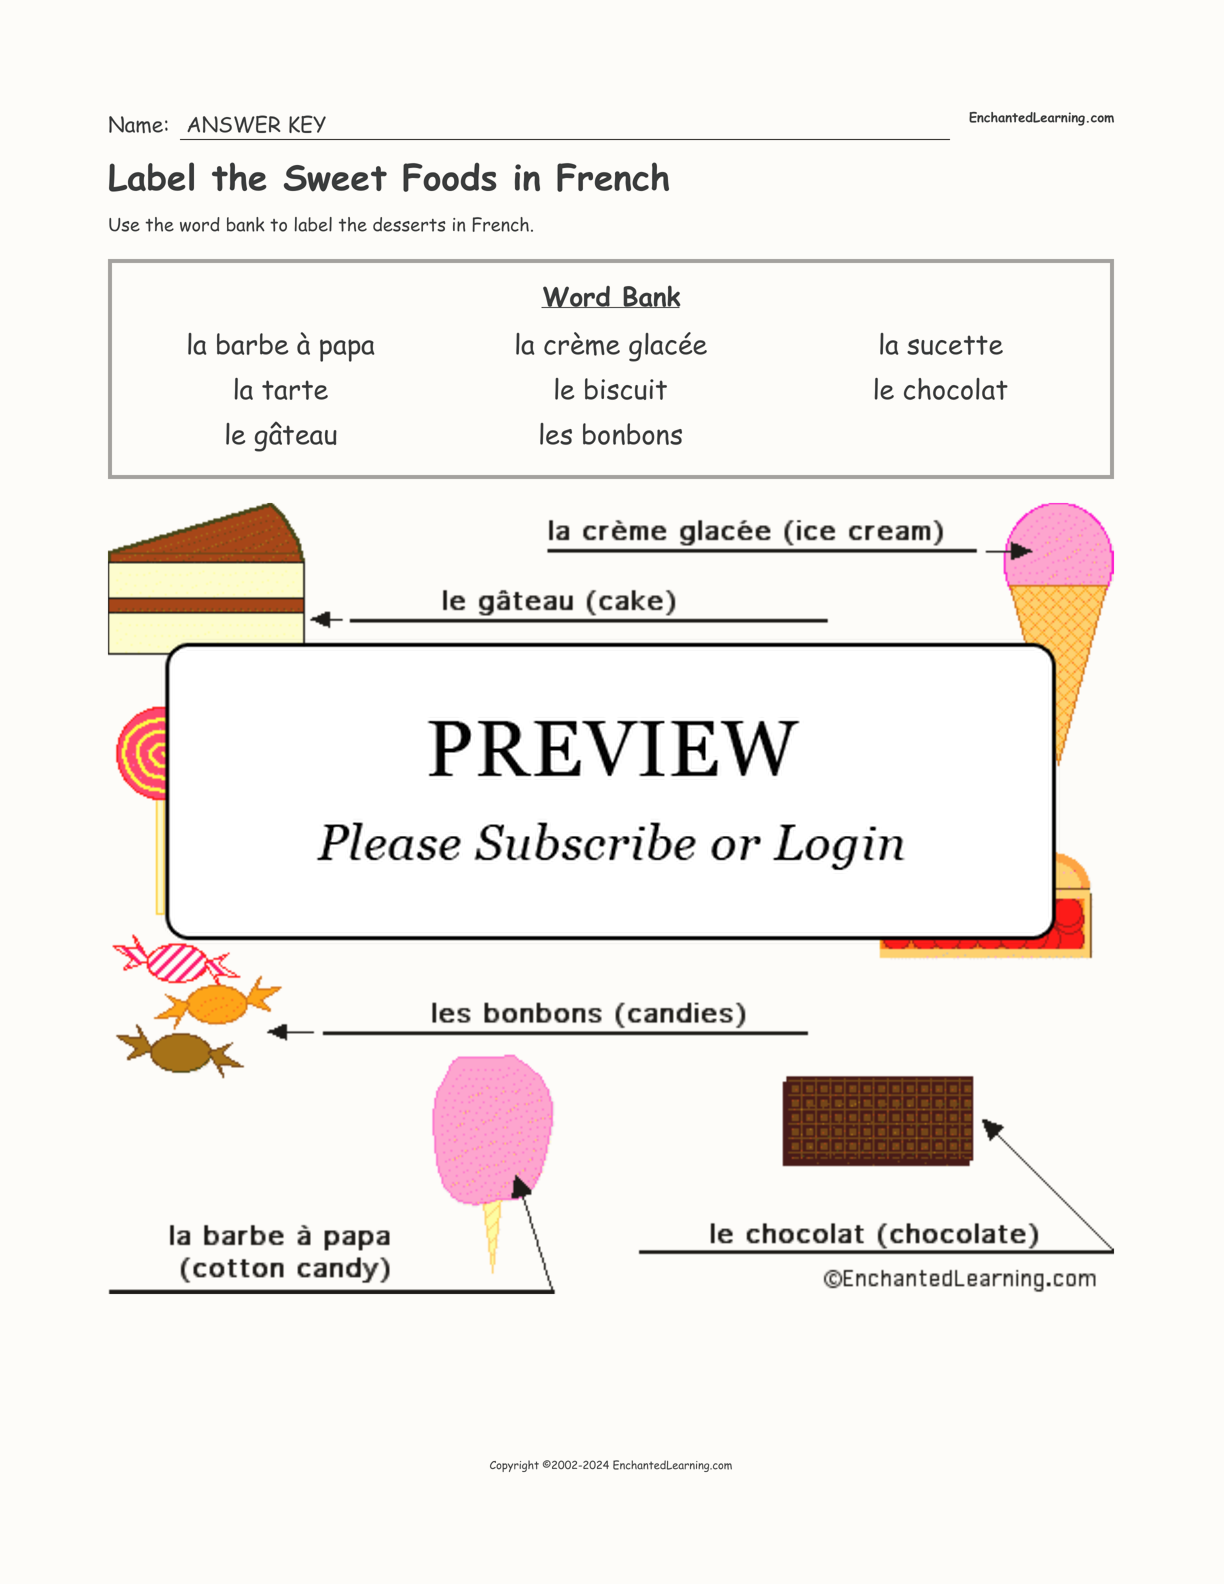 Label the Sweet Foods in French interactive worksheet page 2